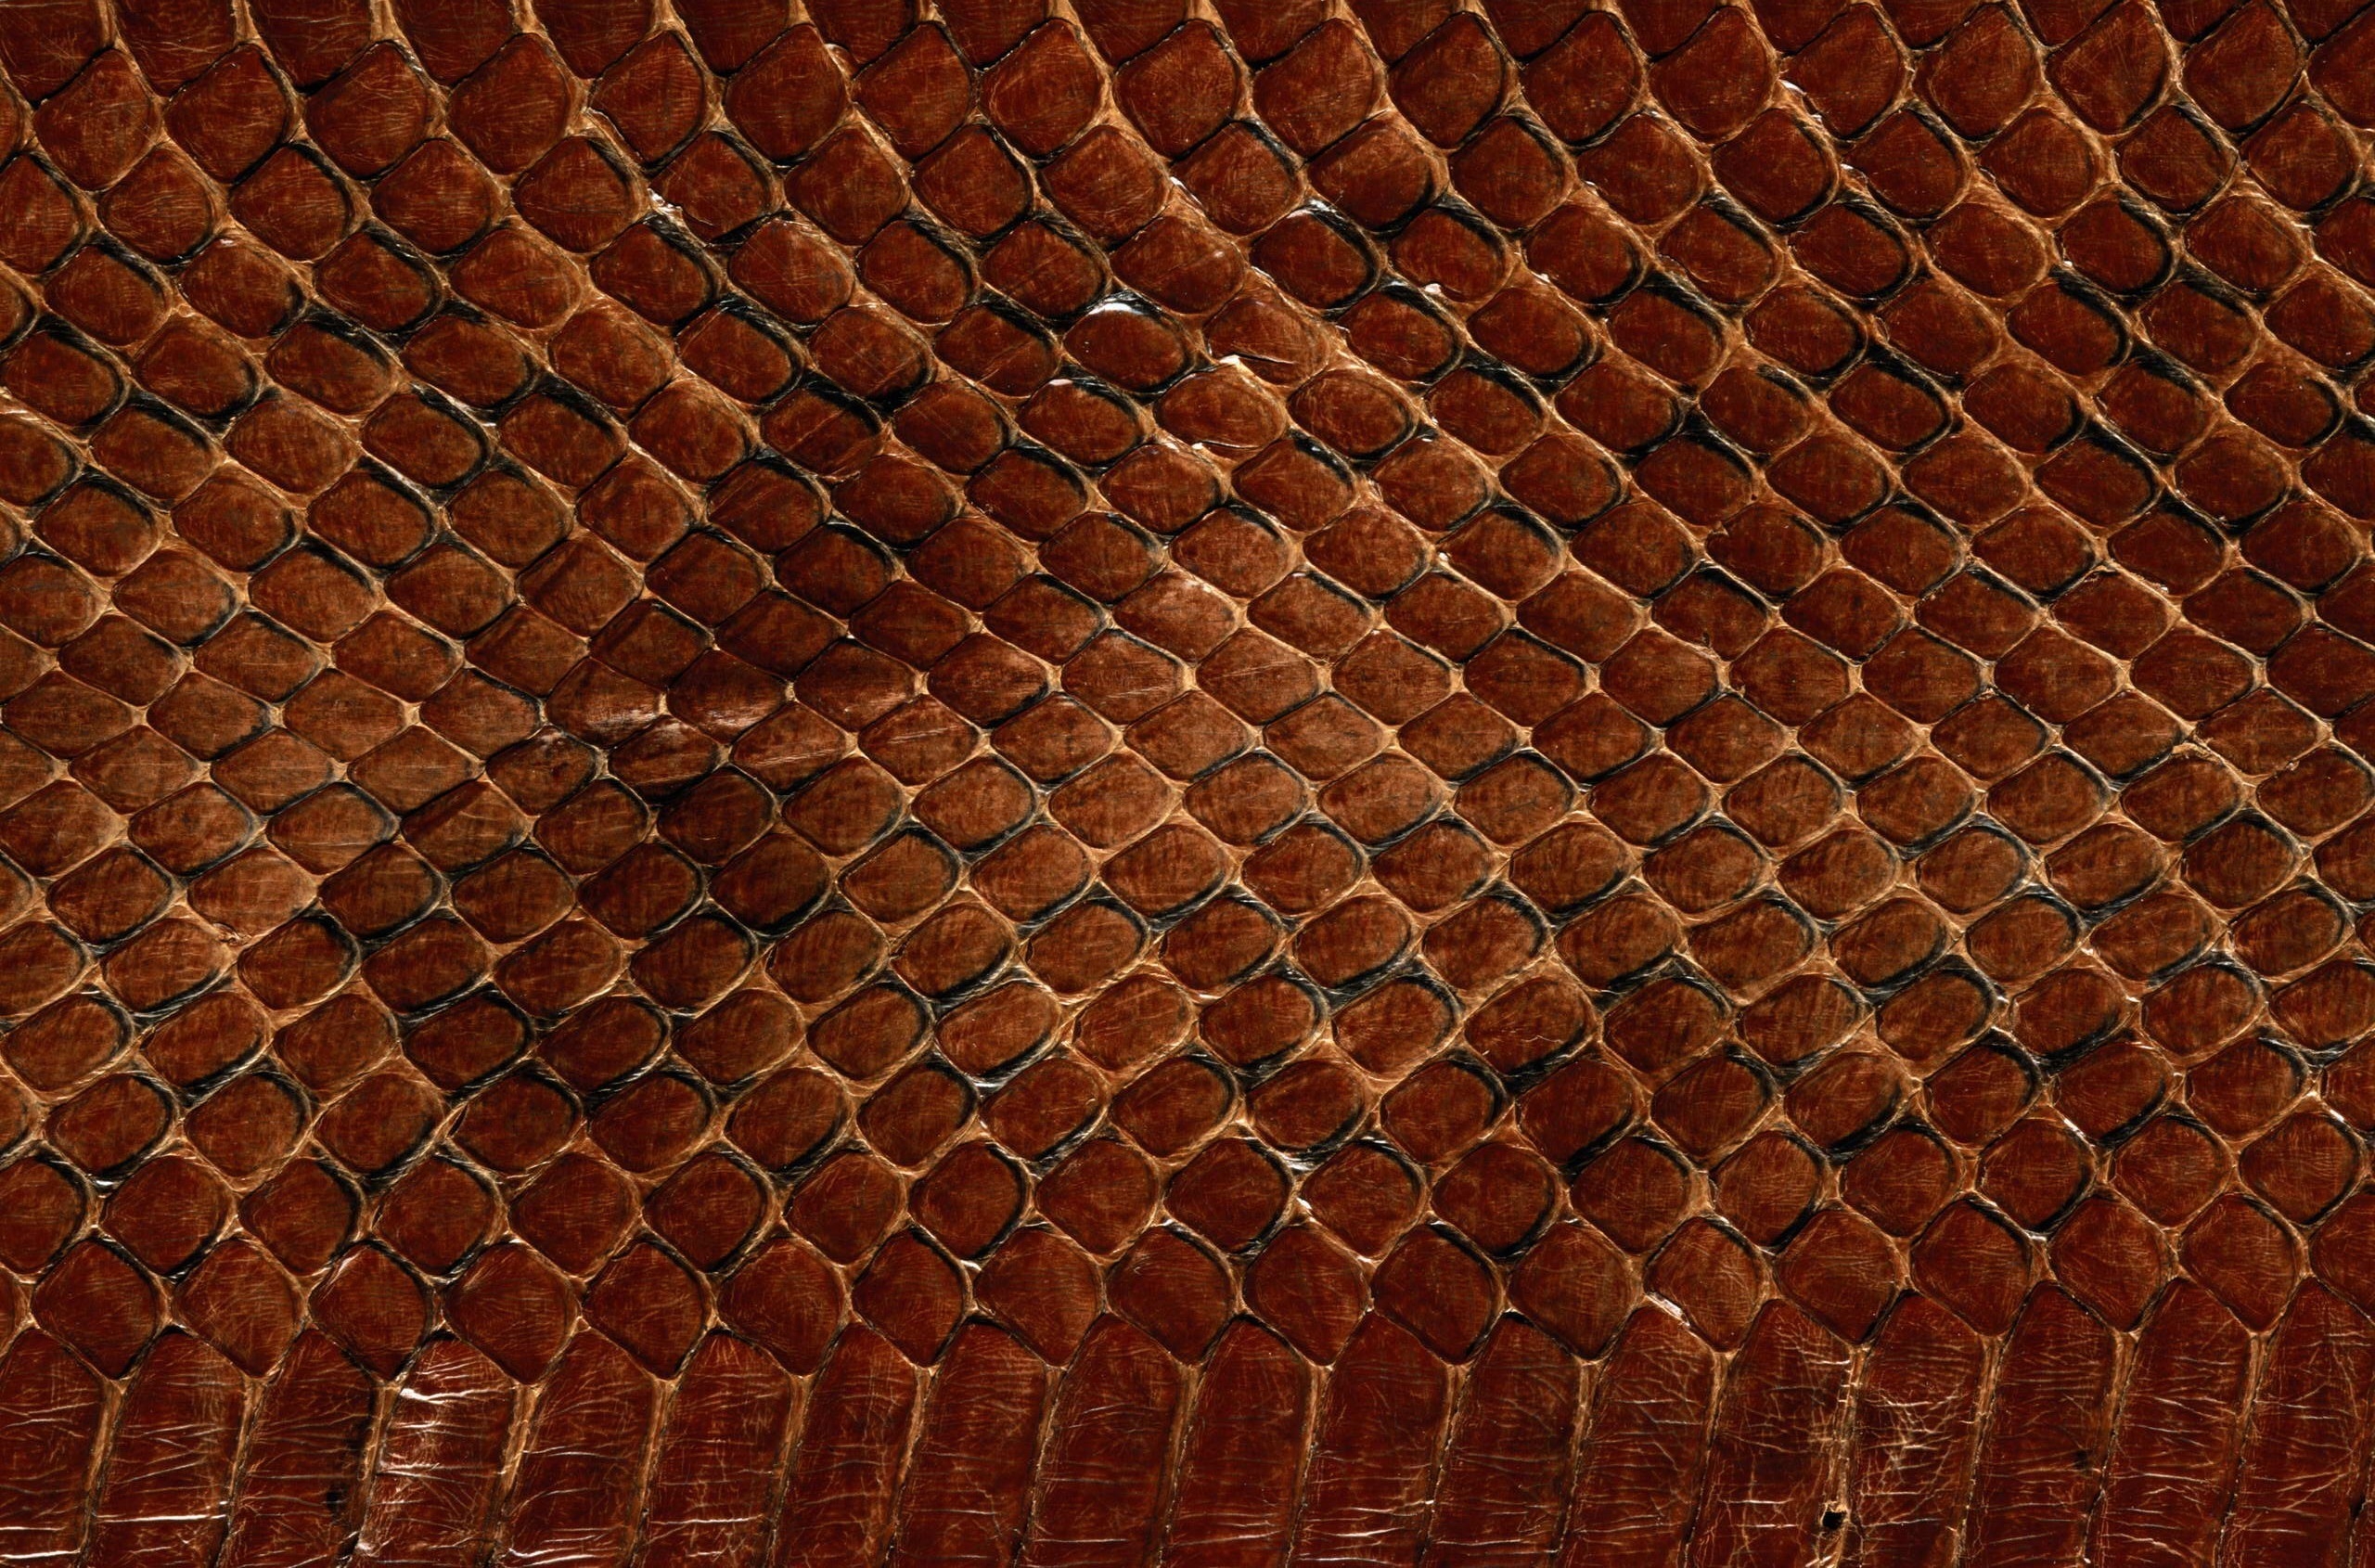 skin, leather, background, texture, textures, snake scales, scales of snakes